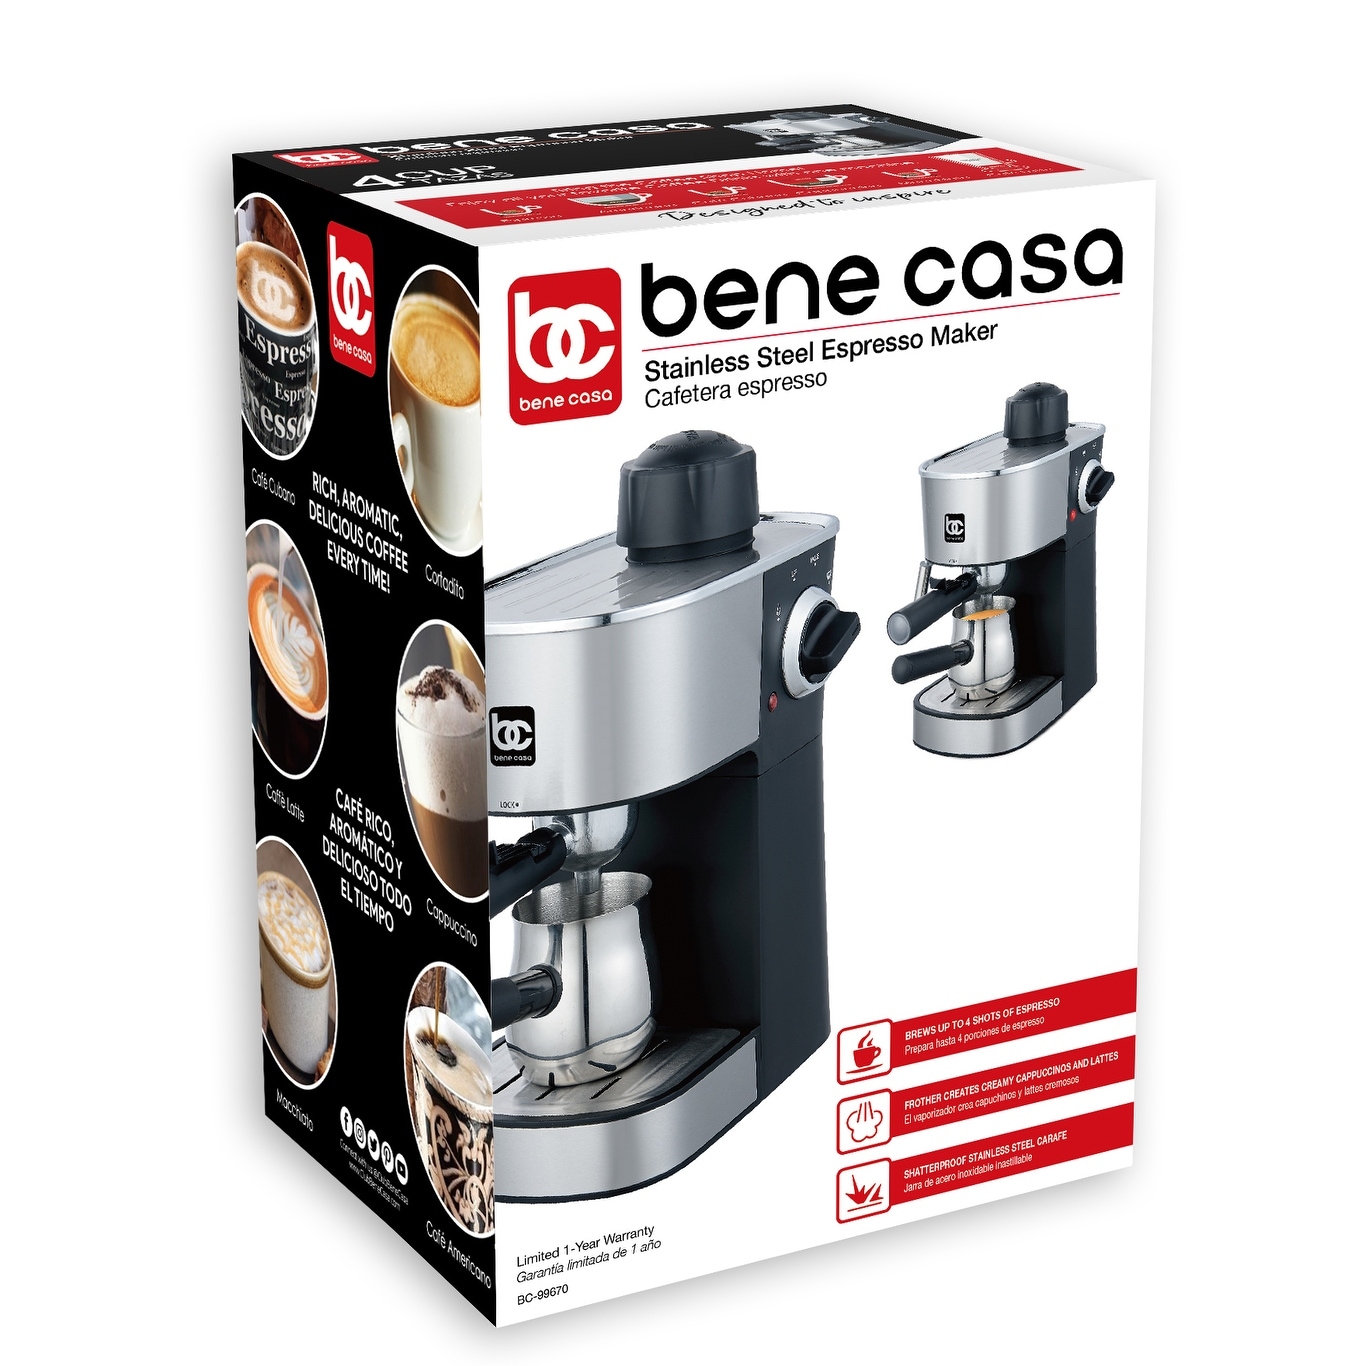 Bene Casa 4-cup stainless-steel espresso maker with steam frother